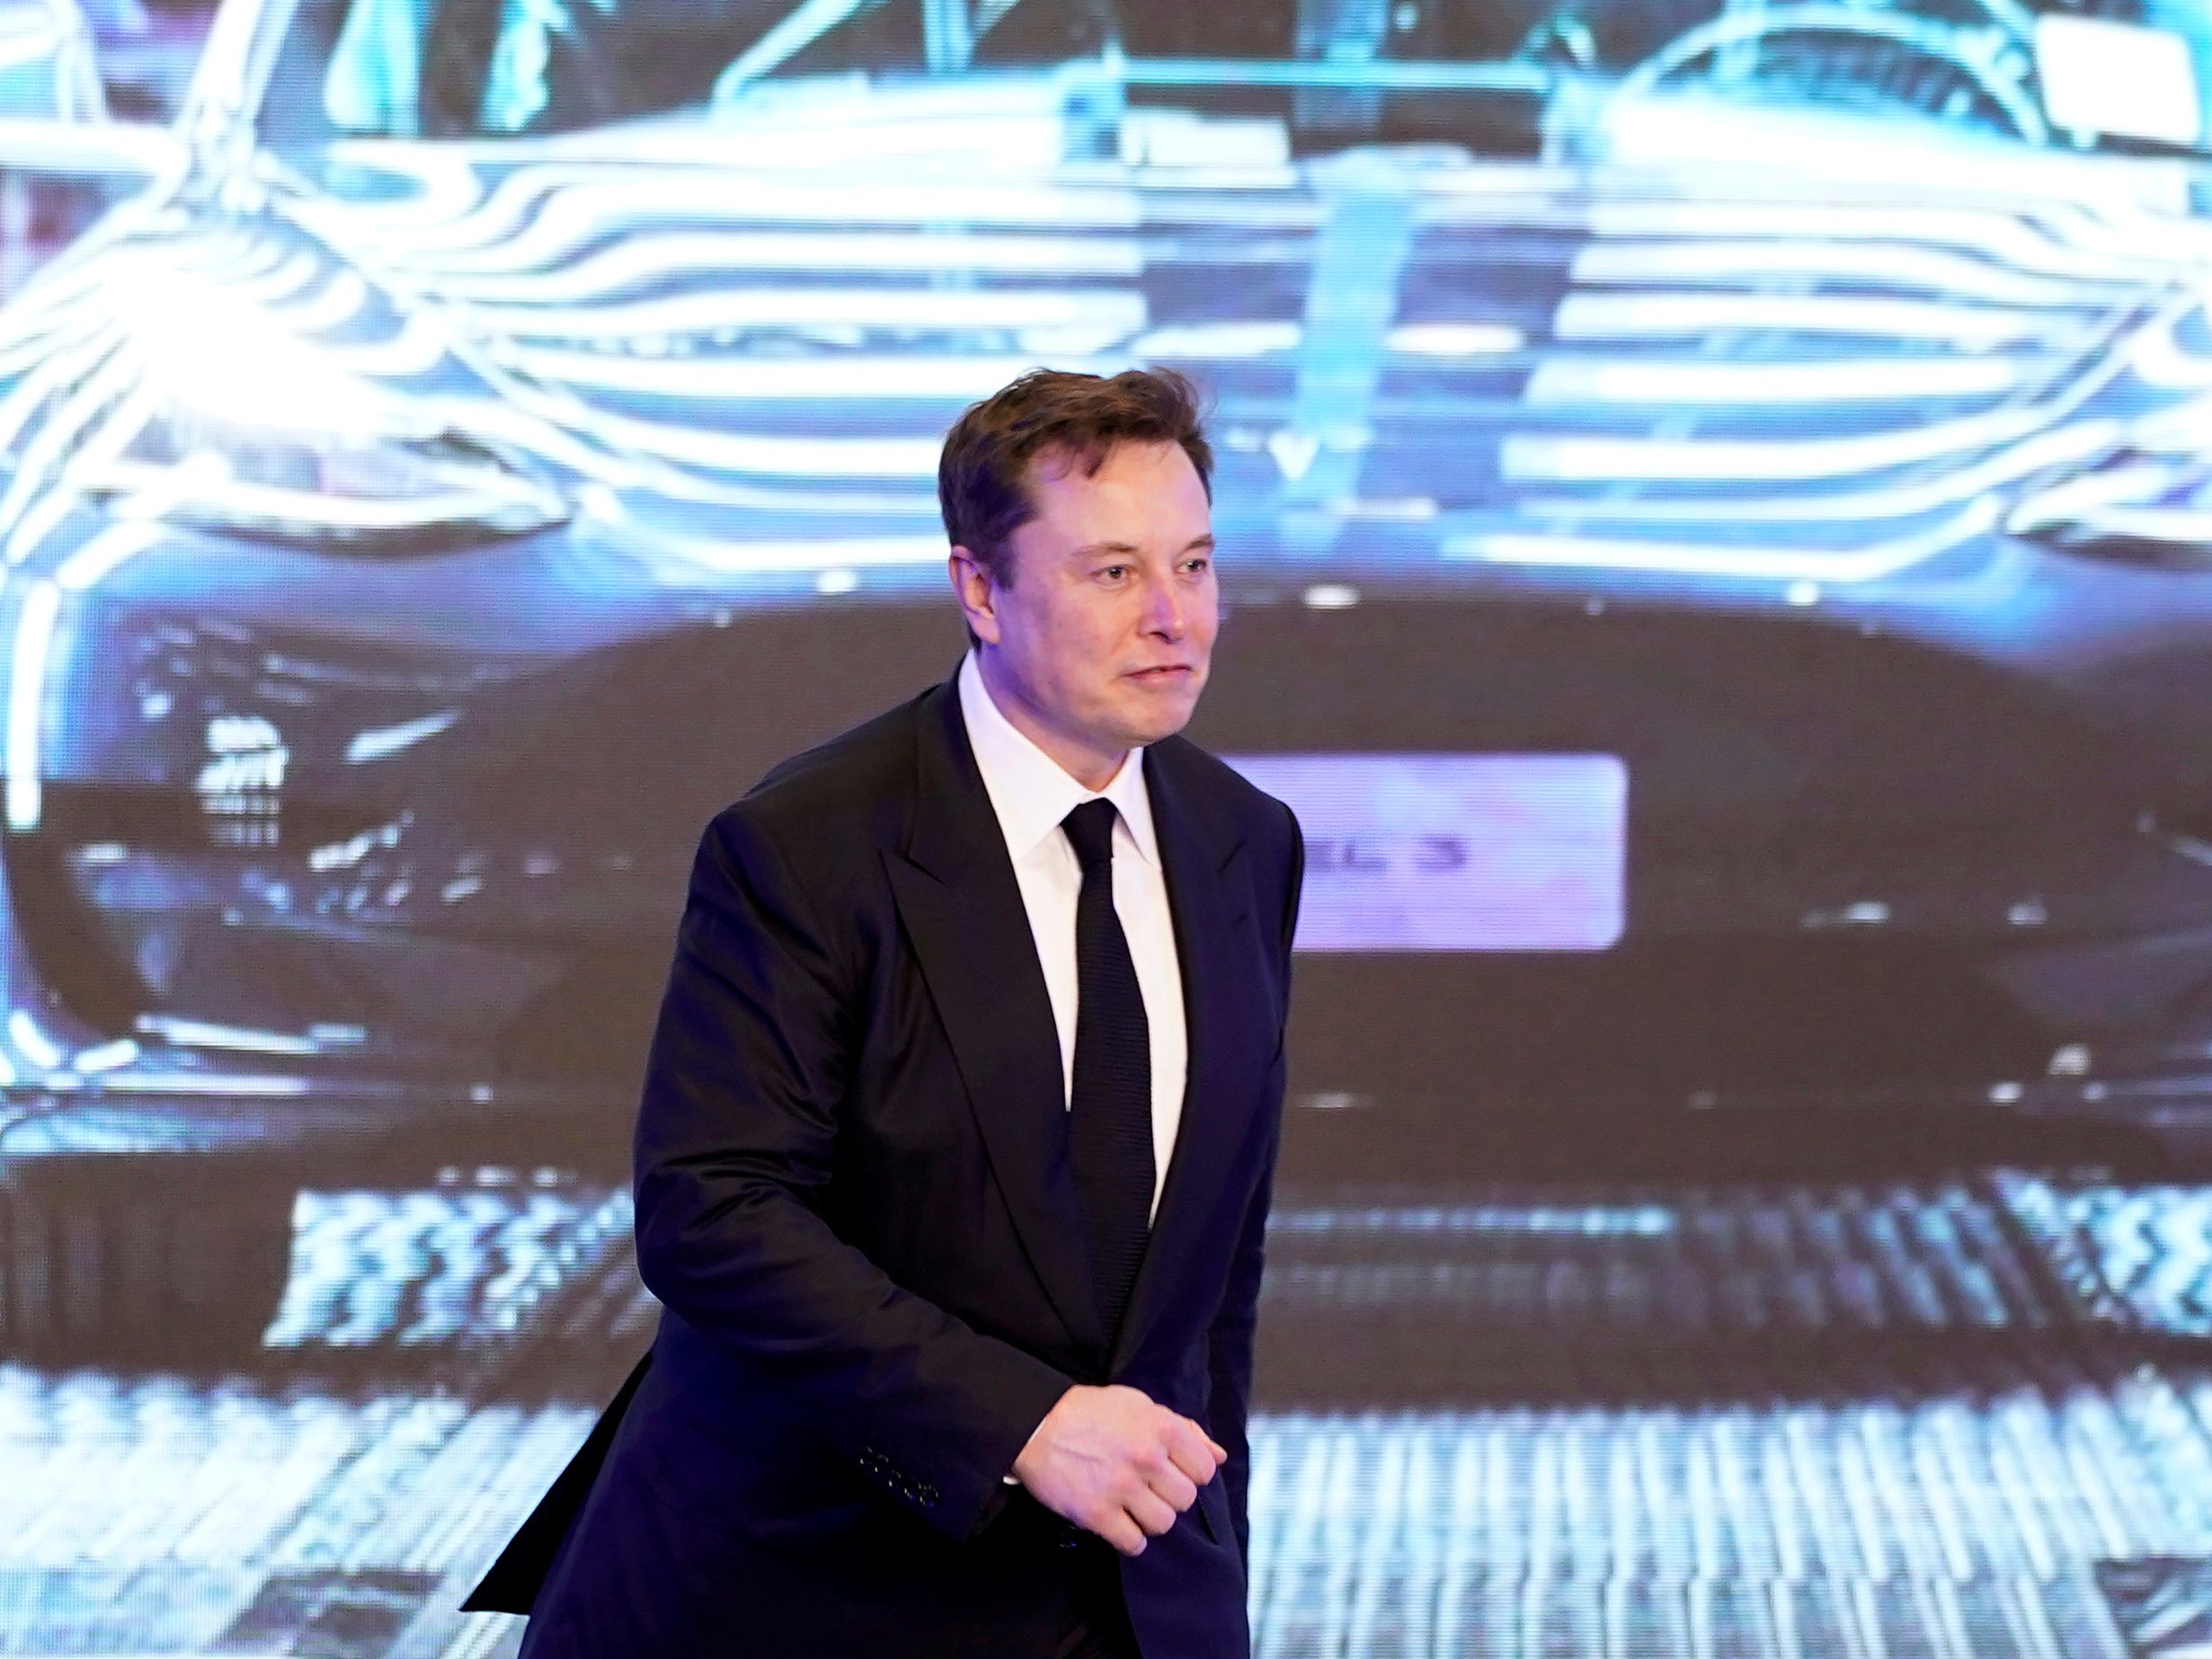 Tesla CEO Elon Musk in a black suit walks on stage in front of an image of a Model Y vehicle